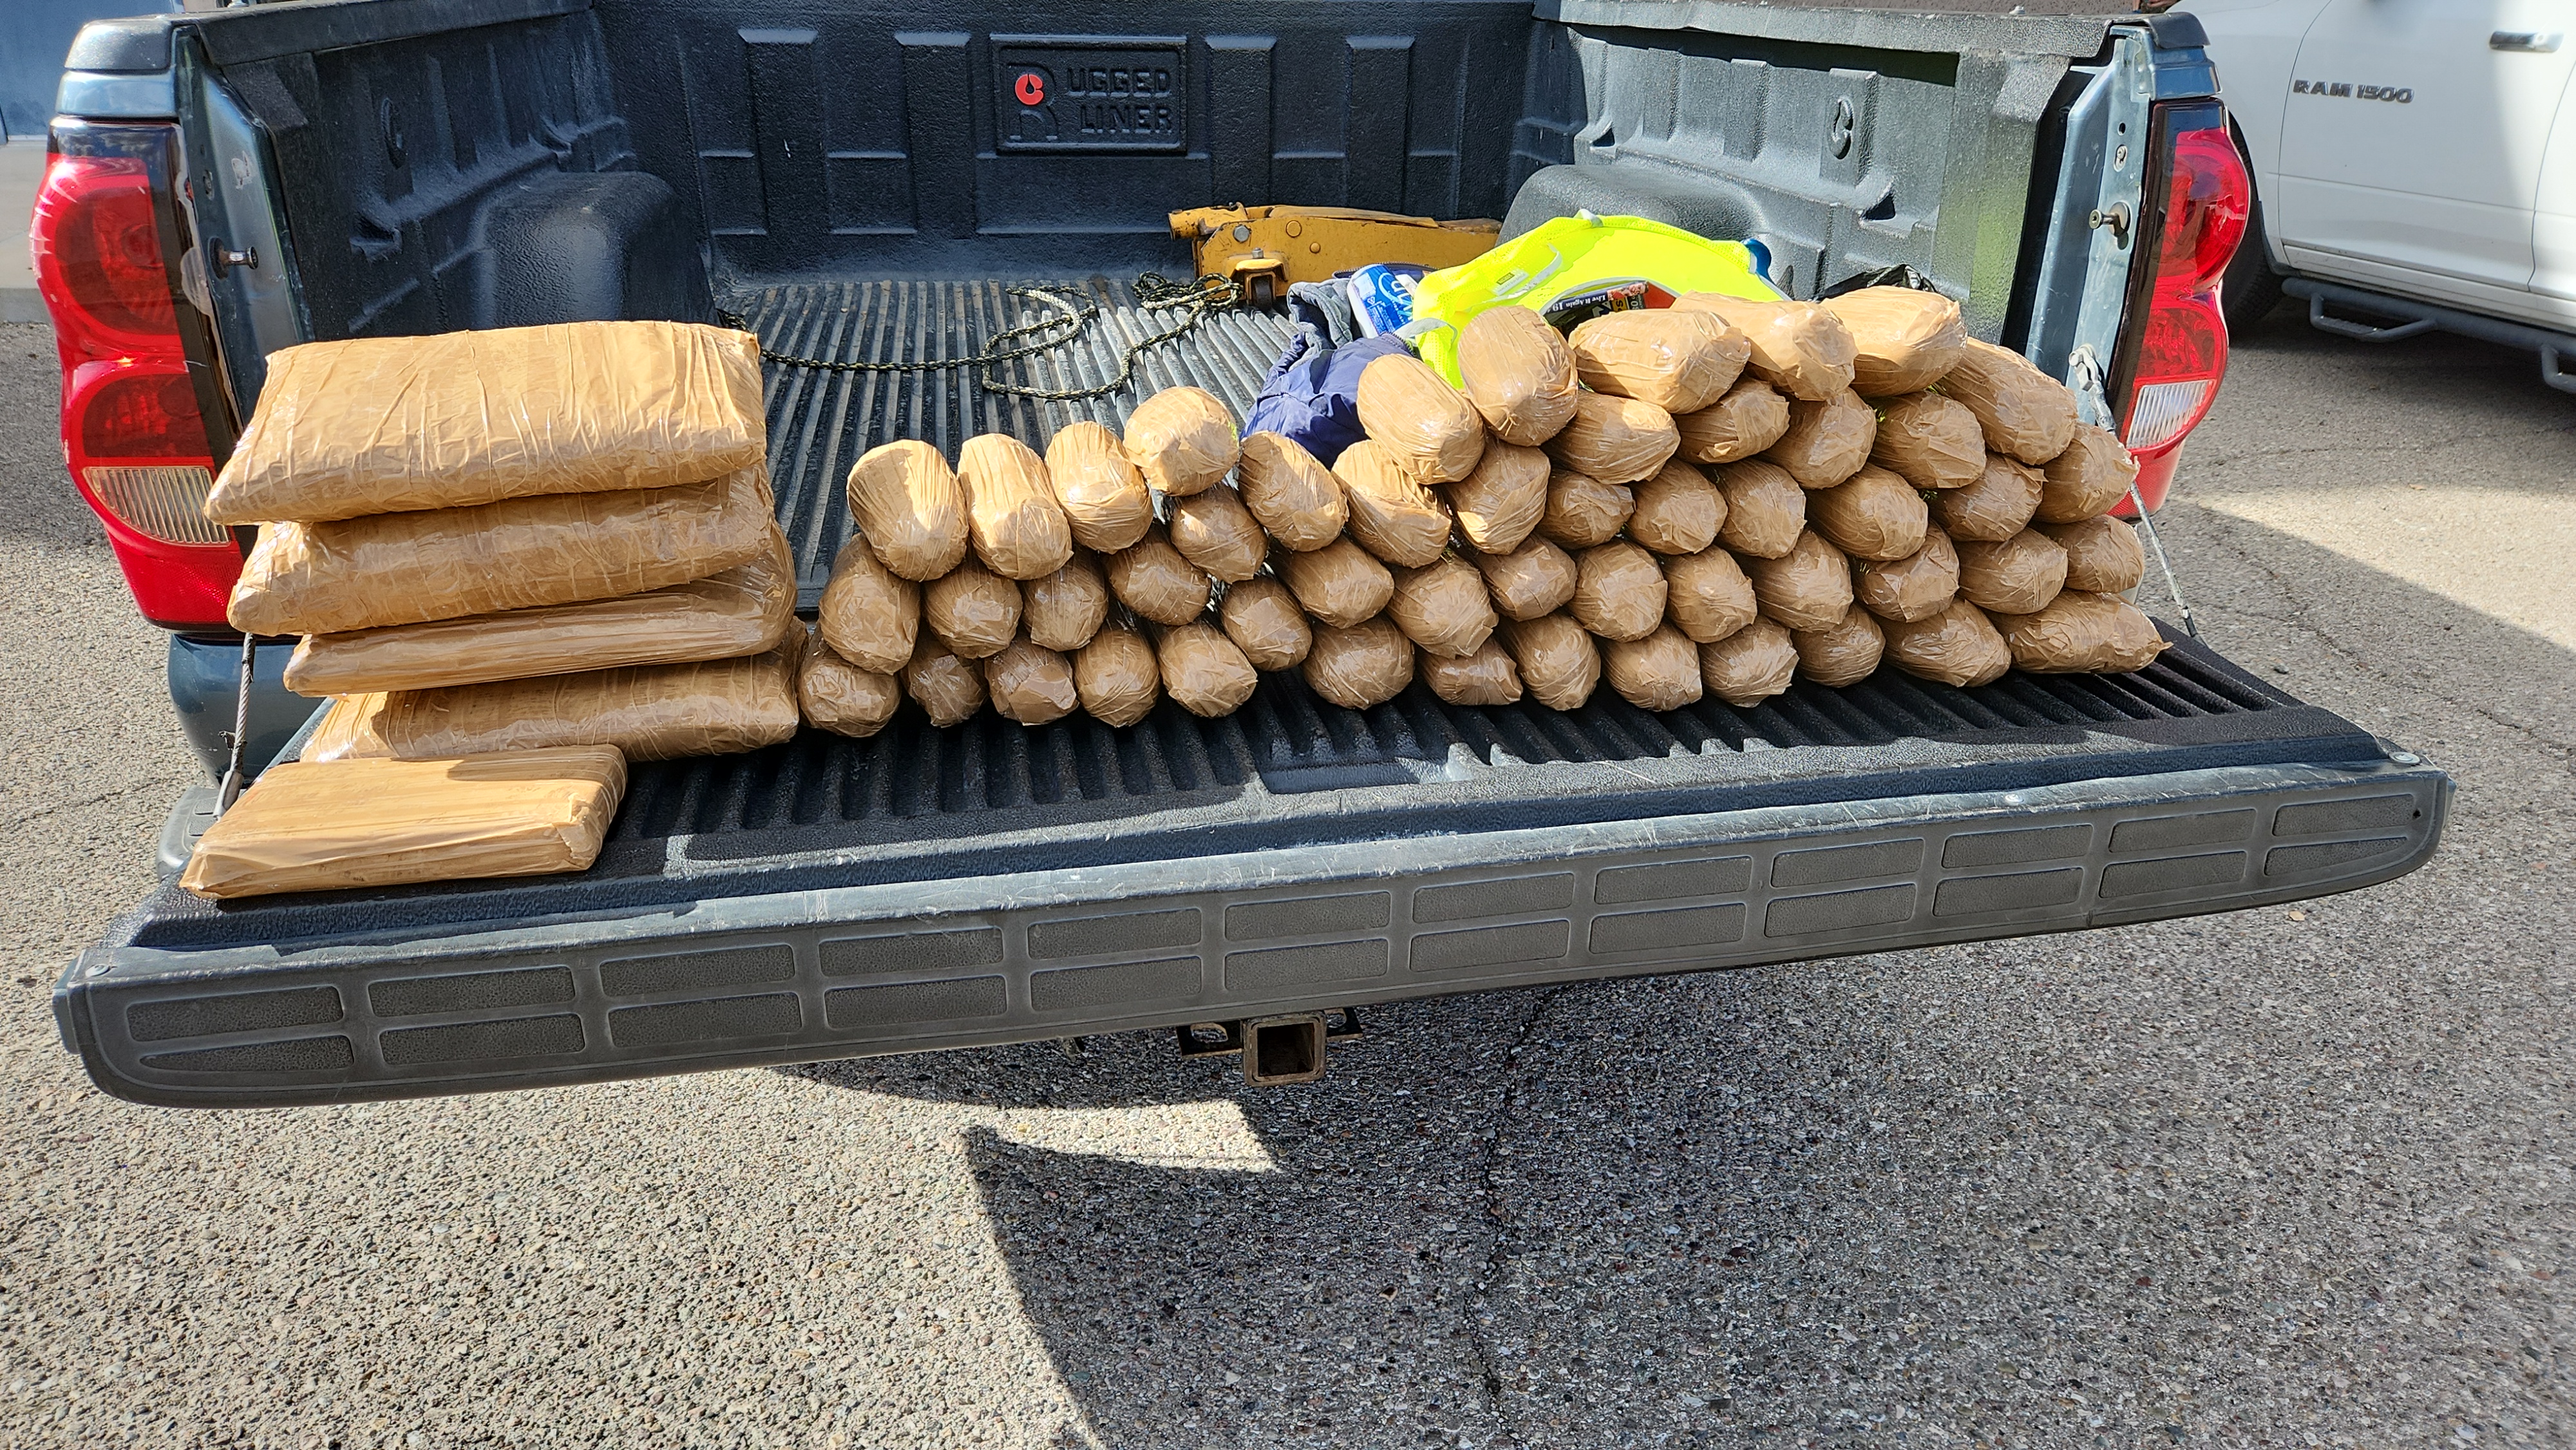 Fentanyl and methamphetamine bundled in brown wrapping in the bed of a pickup truck